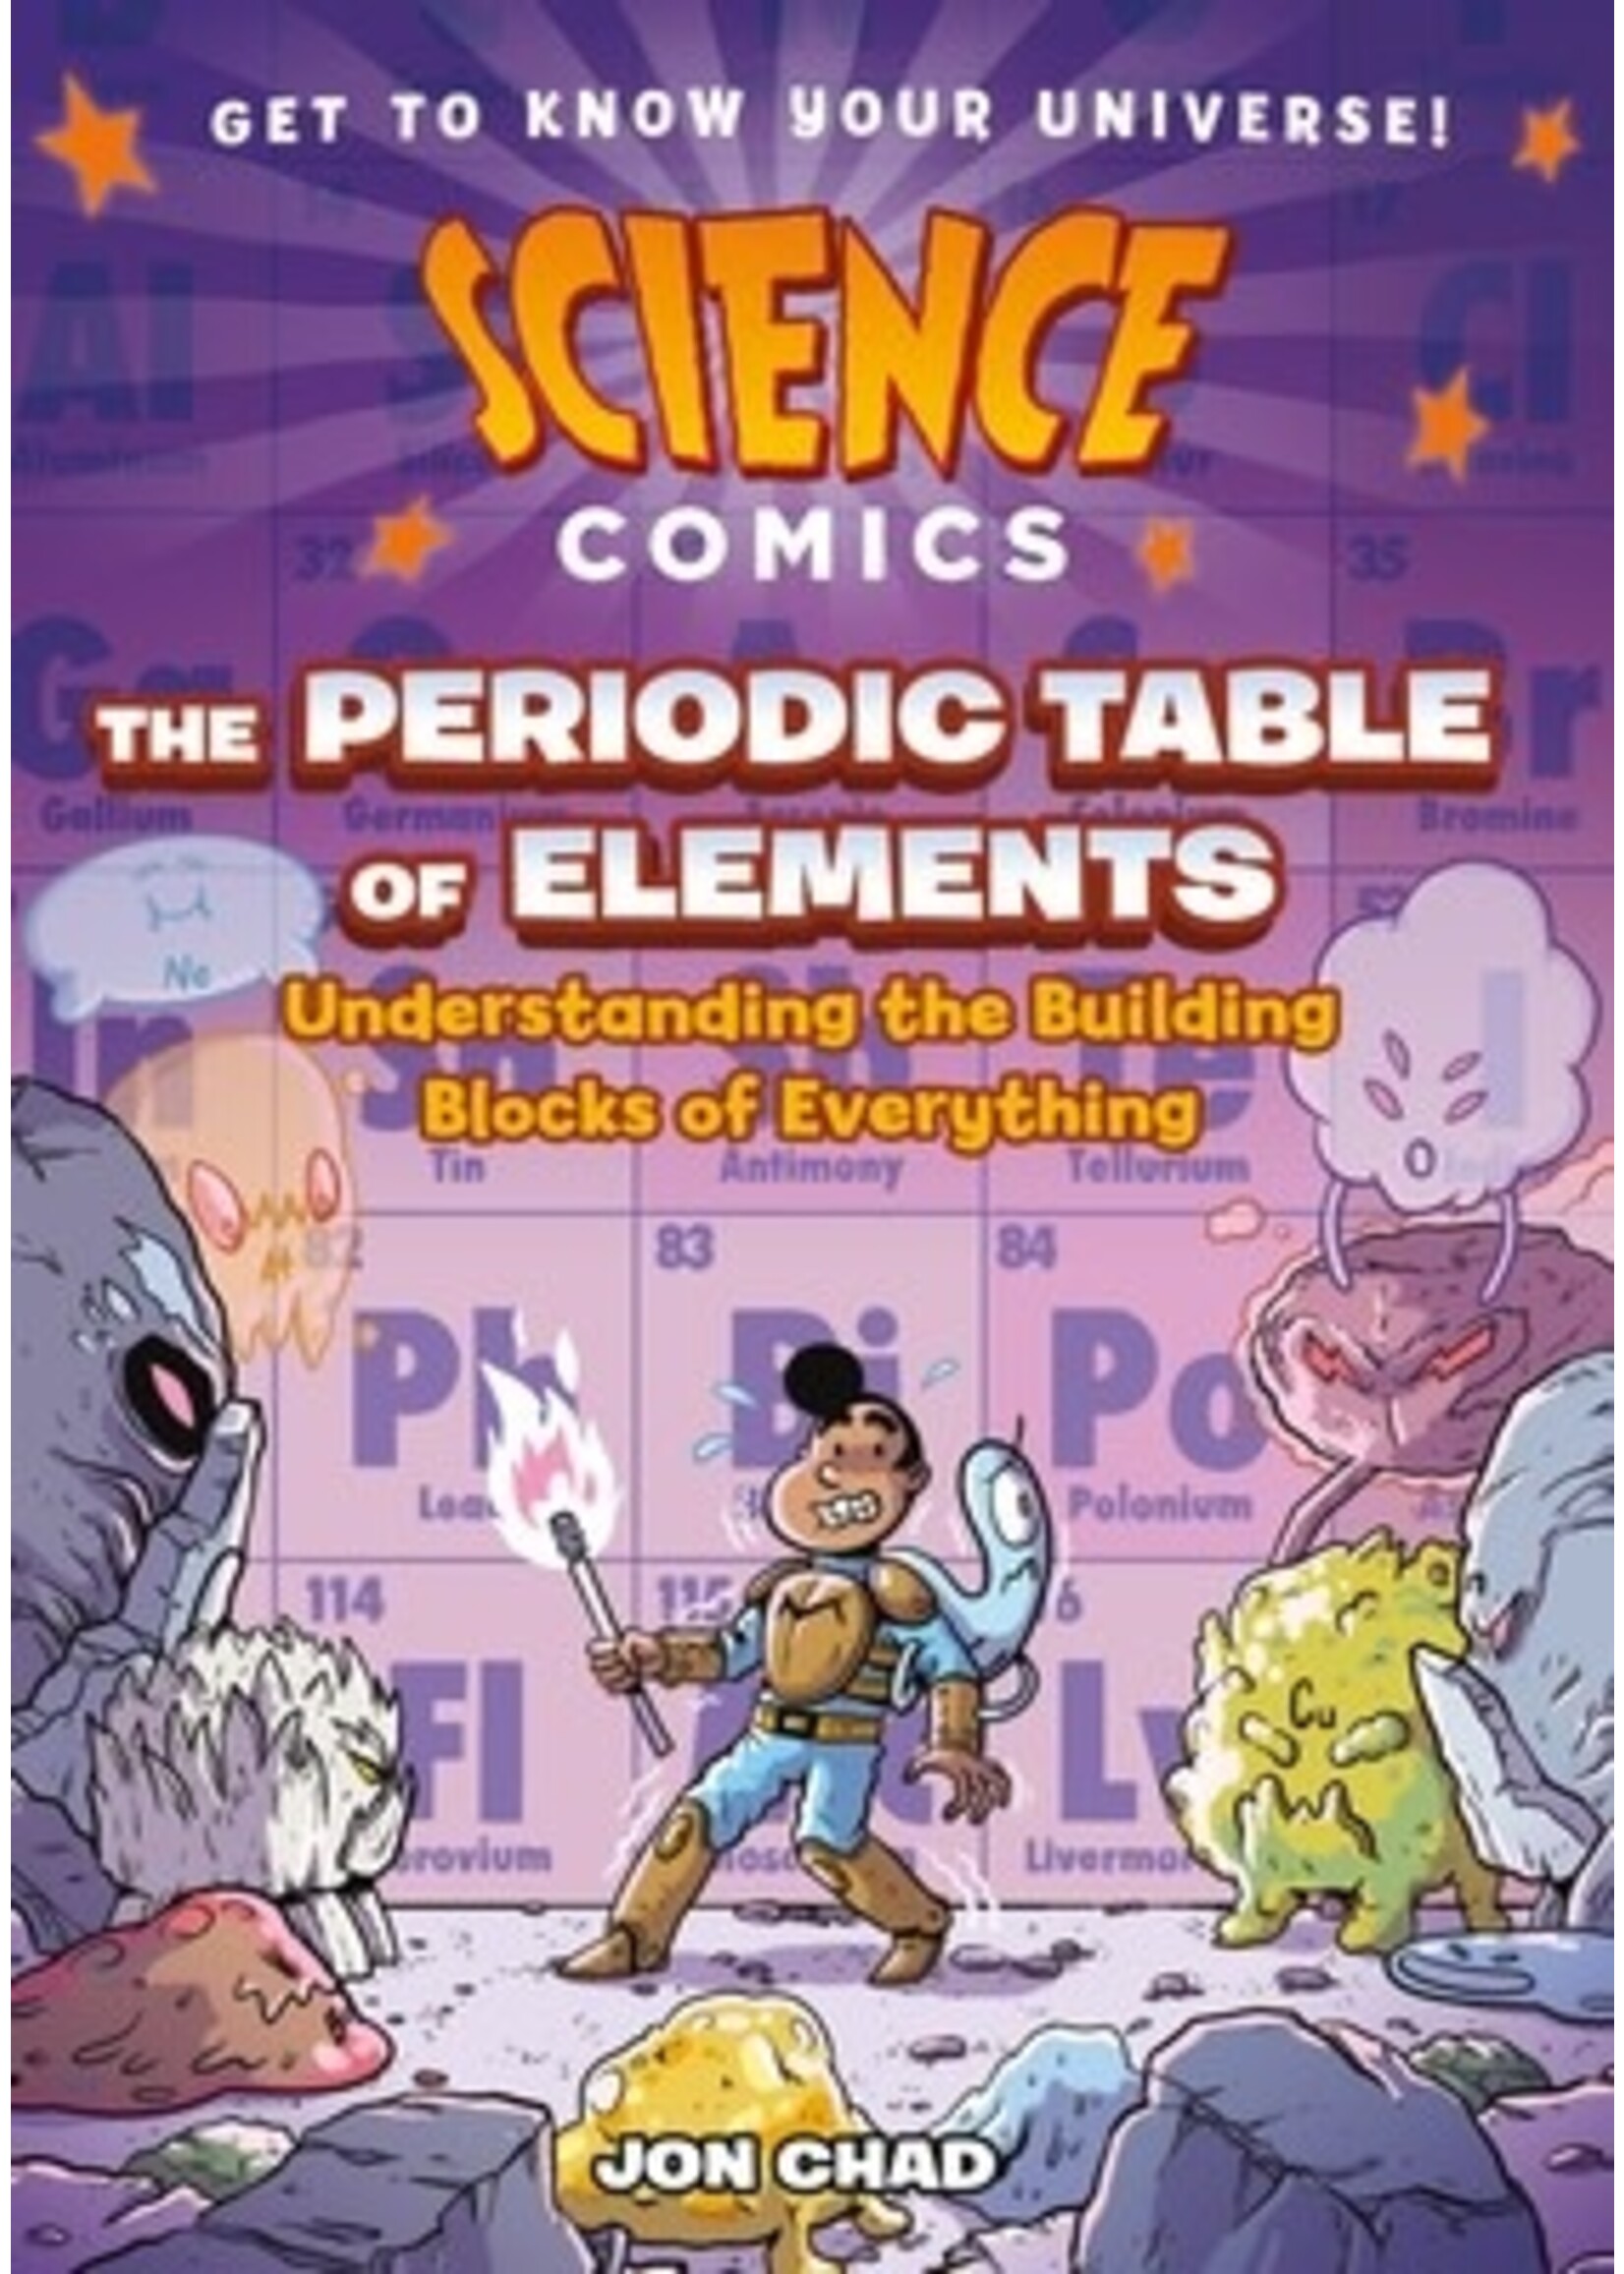 Science Comics: The Periodic Table of Elements - Understanding the Building Blocks of Everything by Jon Chad